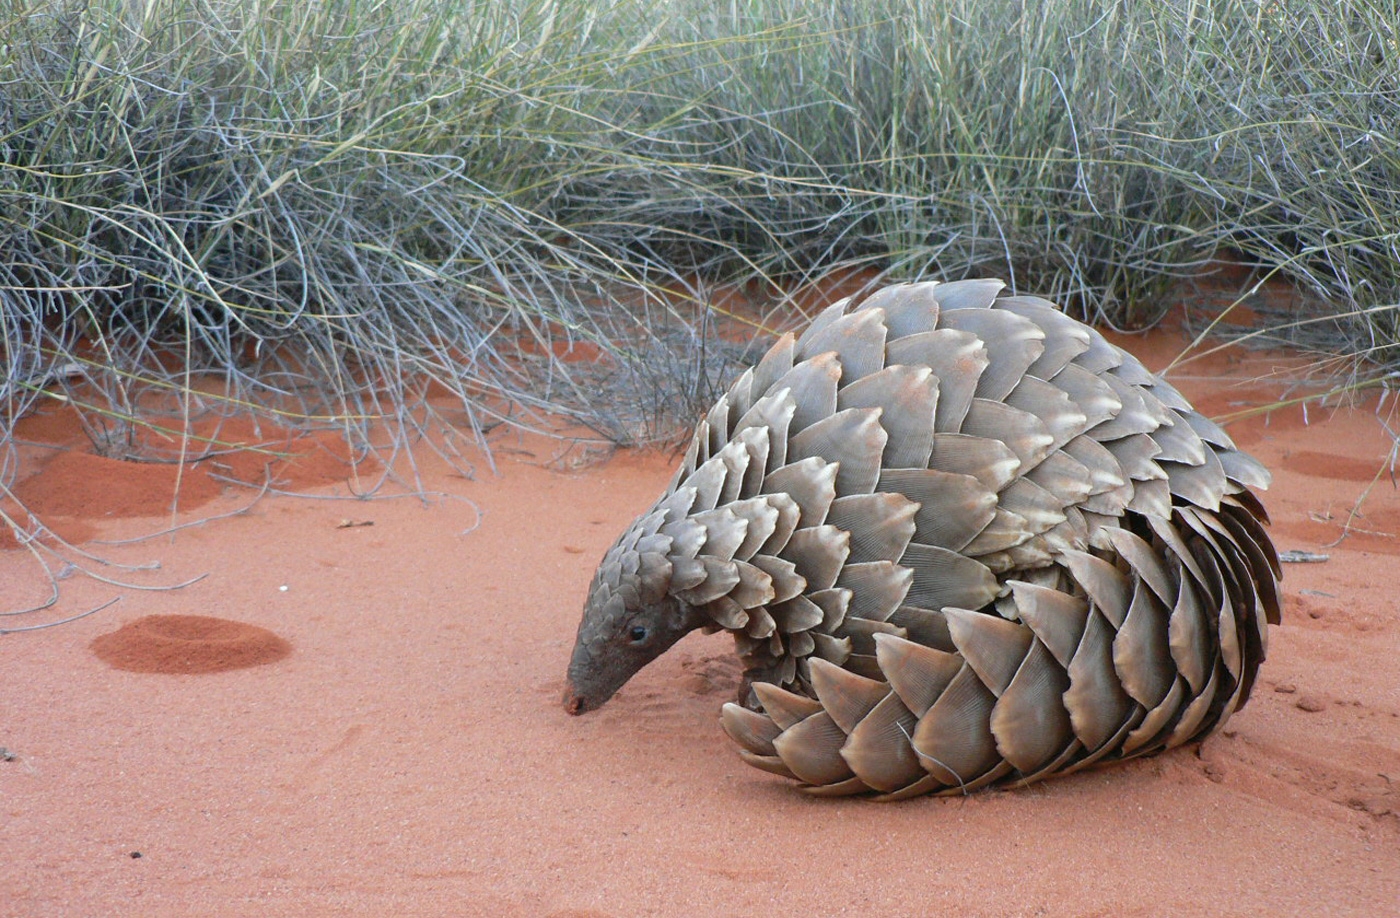 Indian Pangolin trade banned by 182 countries | Pets World1400 x 918